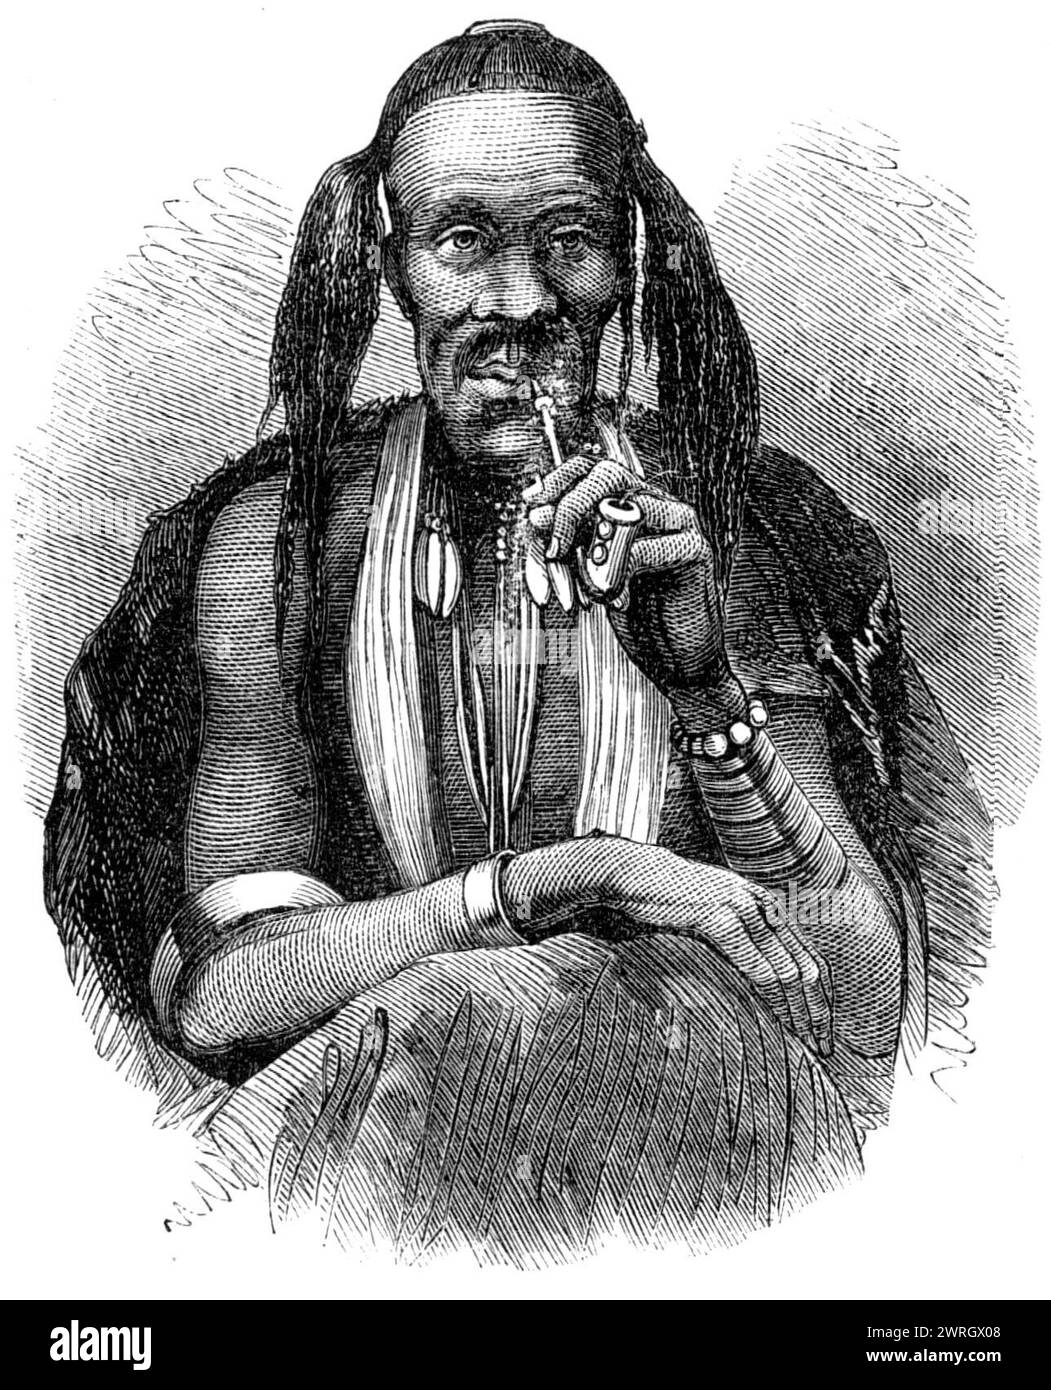 'A kaffir witch doctor, 1864'. Engraving from a photograph sent by Mr. S. D. Mandy. 'The Kaffir tribes of British Kaffraria, as well as those in other parts of South Africa, have a large body of native doctors residing amongst them, who exercise great influence over the people, and in whom all the Kaffirs are in the habit of placing implicit confidence for their treatment of the sick. The Kaffirs, indeed, are a doctor-loving people; their doctors and prophets form part of the machinery of them government, which is upheld by their feeling of devout and superstitious obedience...The Kaffir docto Stock Photo